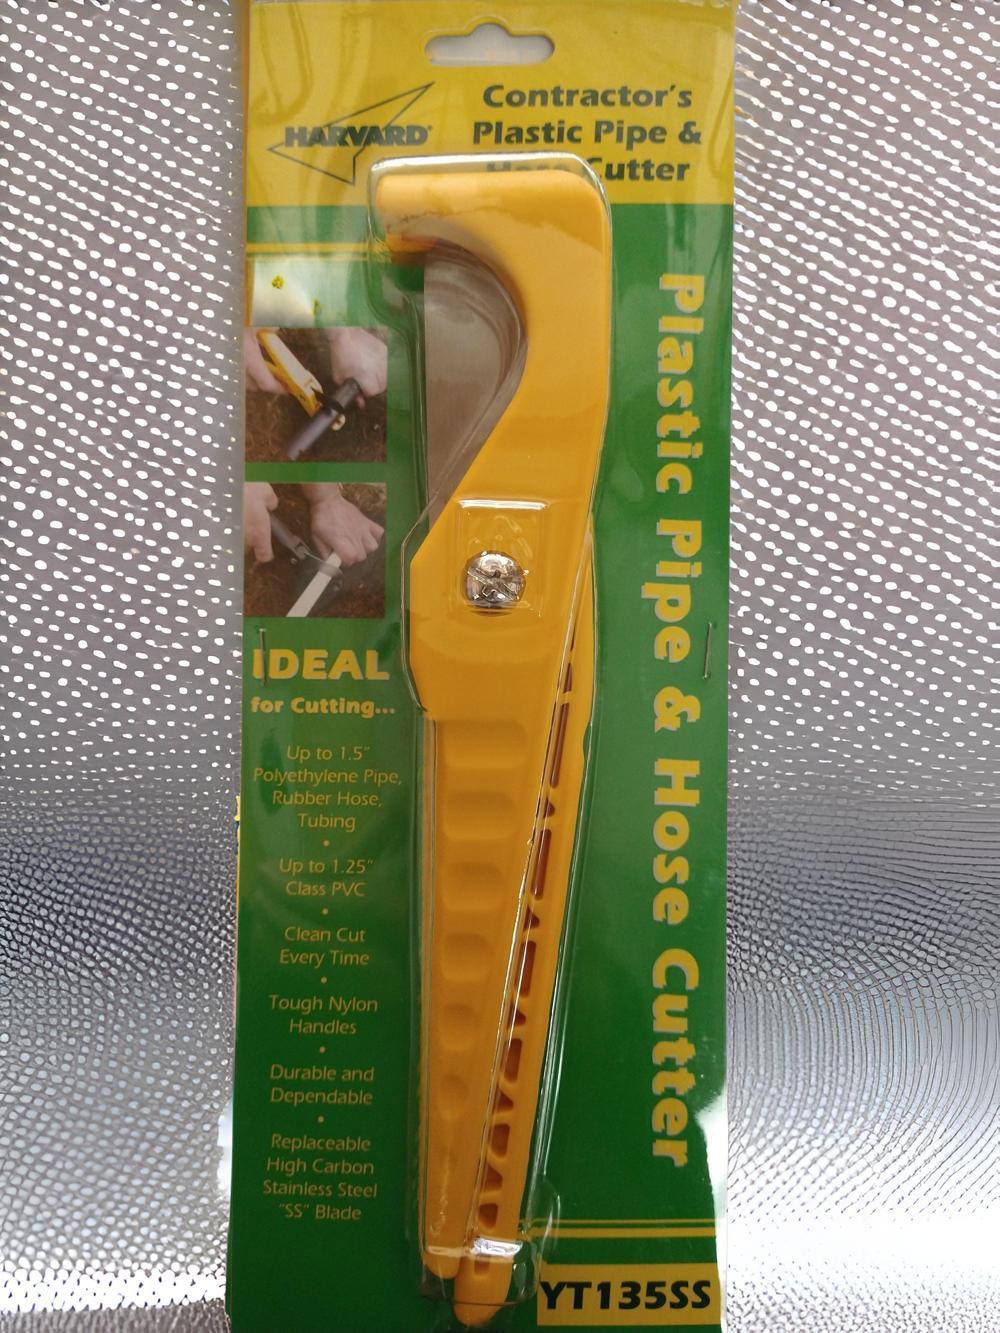 a yellow plastic pipe cutter in a package